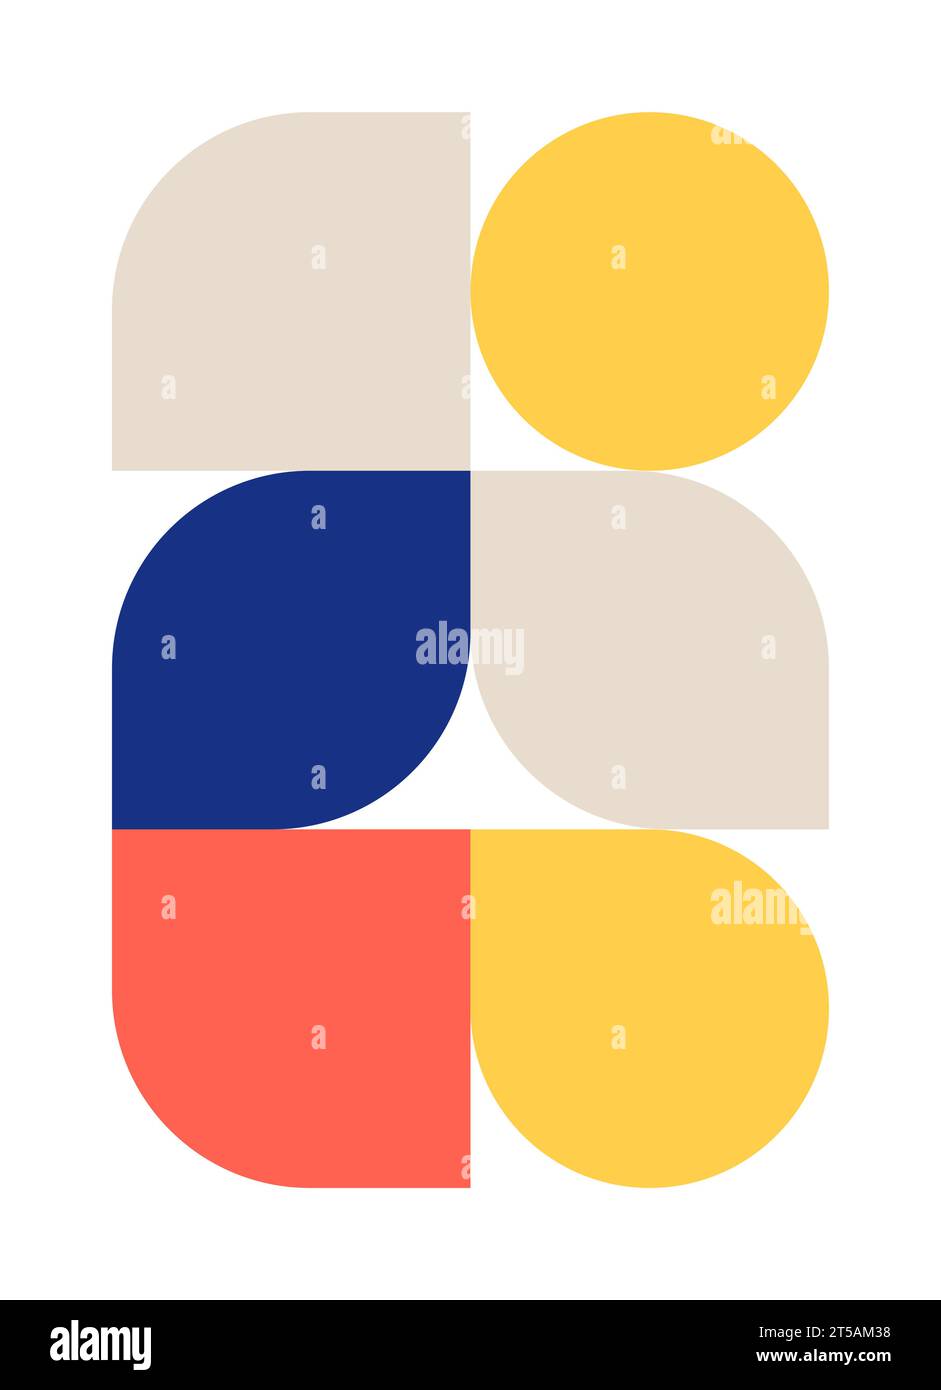 Trendy bauhaus pattern poster. Vector geometric color shapes in blue, beige, yellow and red colors. Simple abstract modern design elements. Fashion Stock Vector